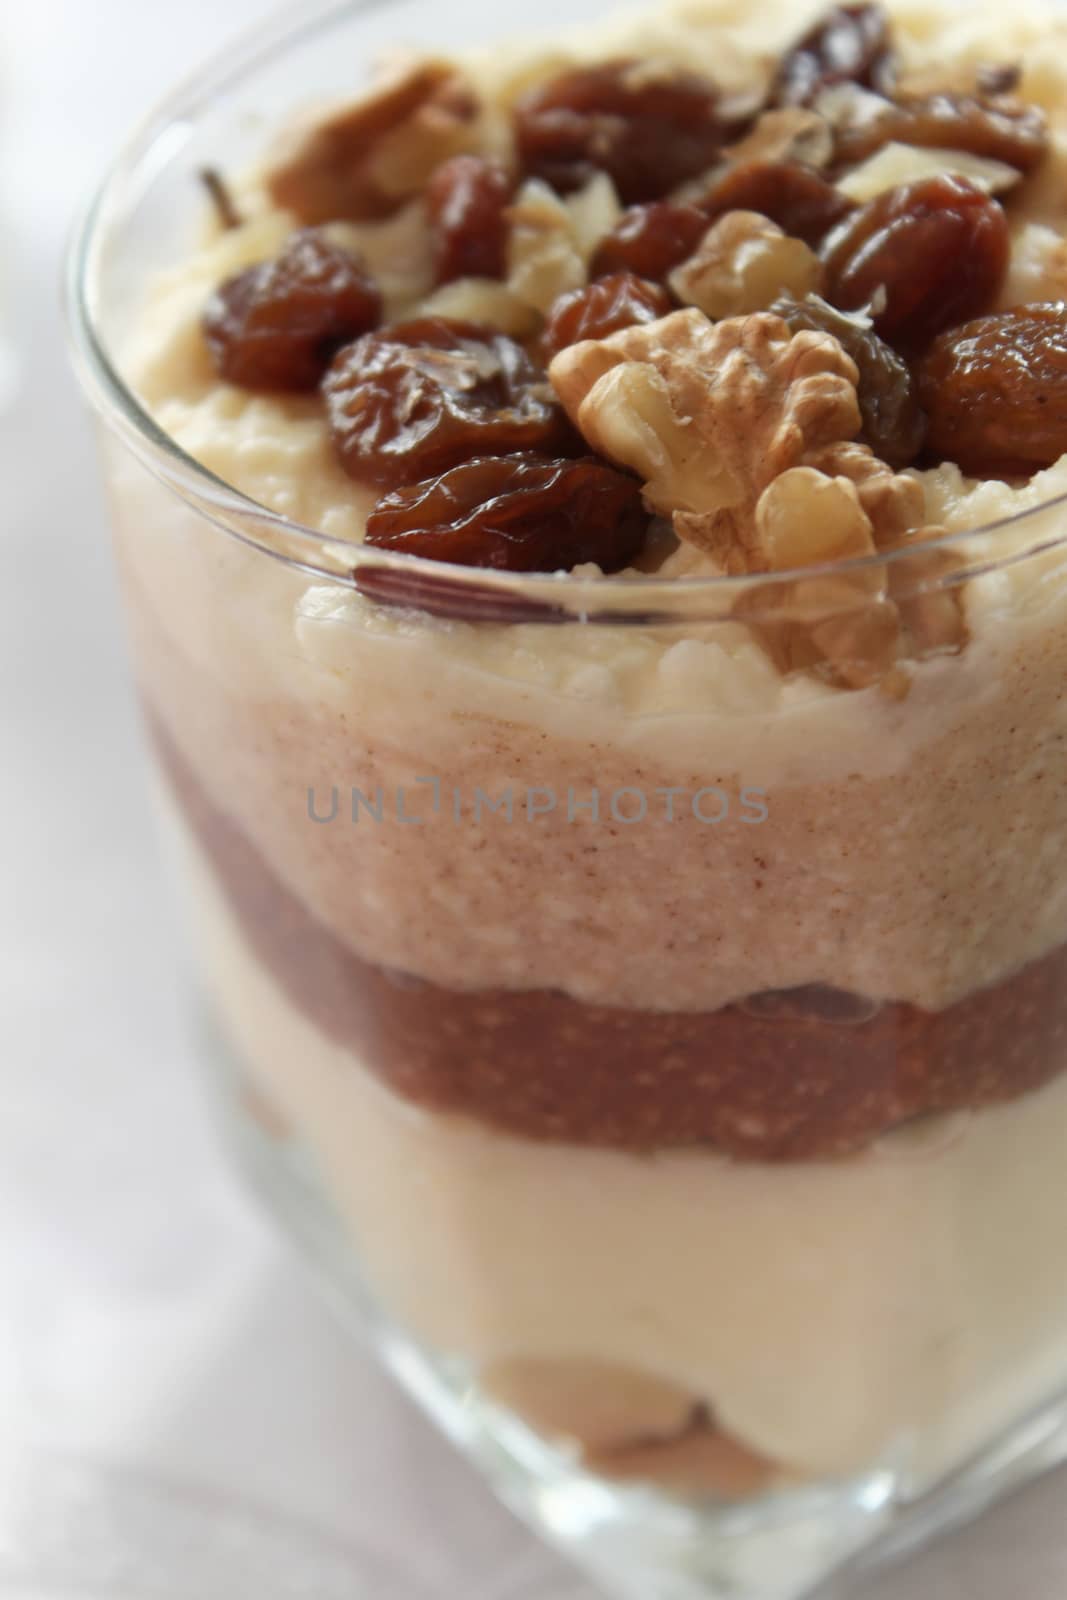 Cheesecake in a glass sprinkled with nuts and raisins by Kasia_Lawrynowicz